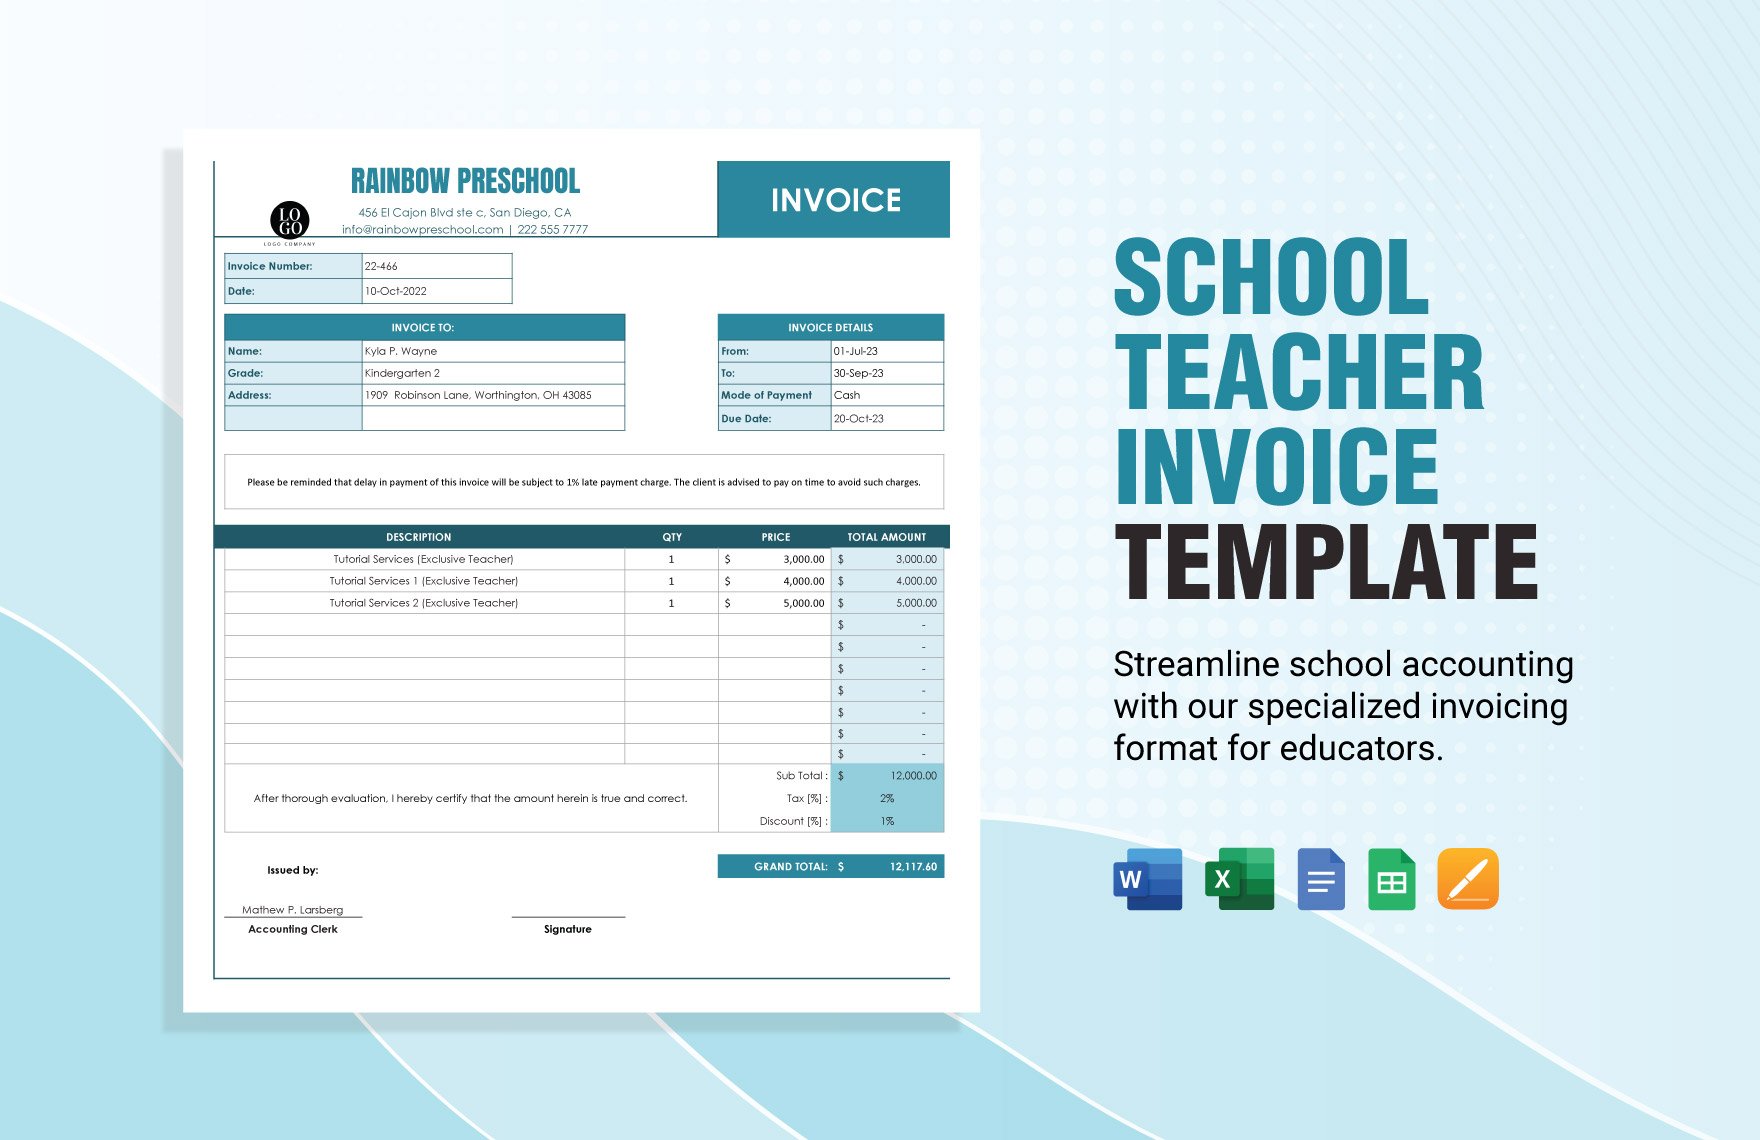 School Teacher Invoice Template in Word, Google Docs, Excel, Google Sheets, Apple Pages